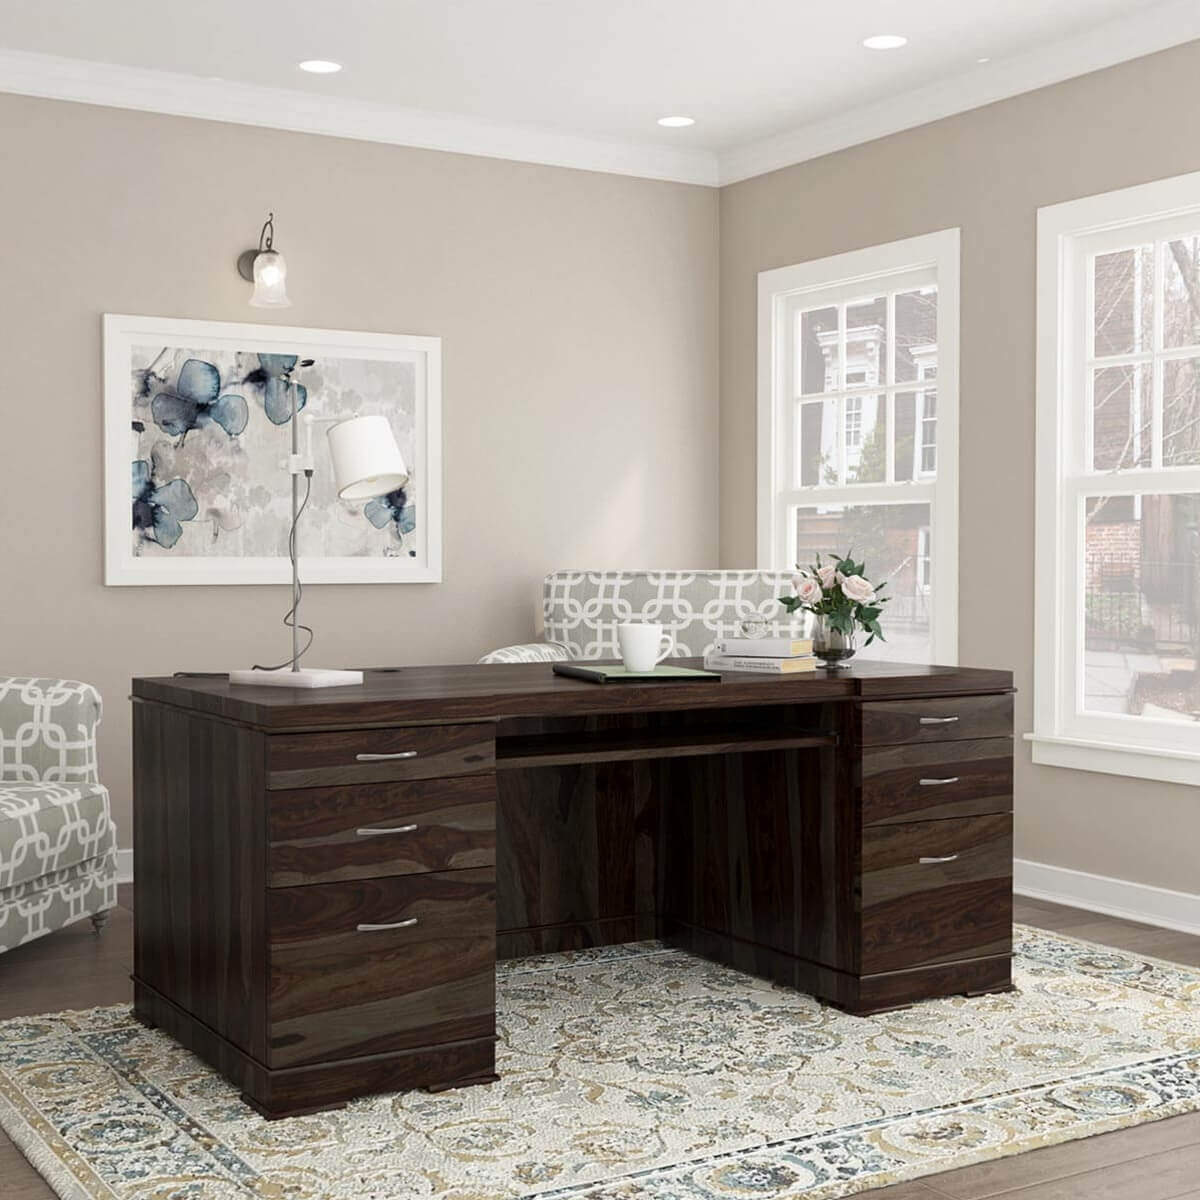 https://www.sierralivingconcepts.com/images/thumbs/0398200_blanford-rustic-solid-wood-home-office-executive-desk-w-file-cabinets.jpeg